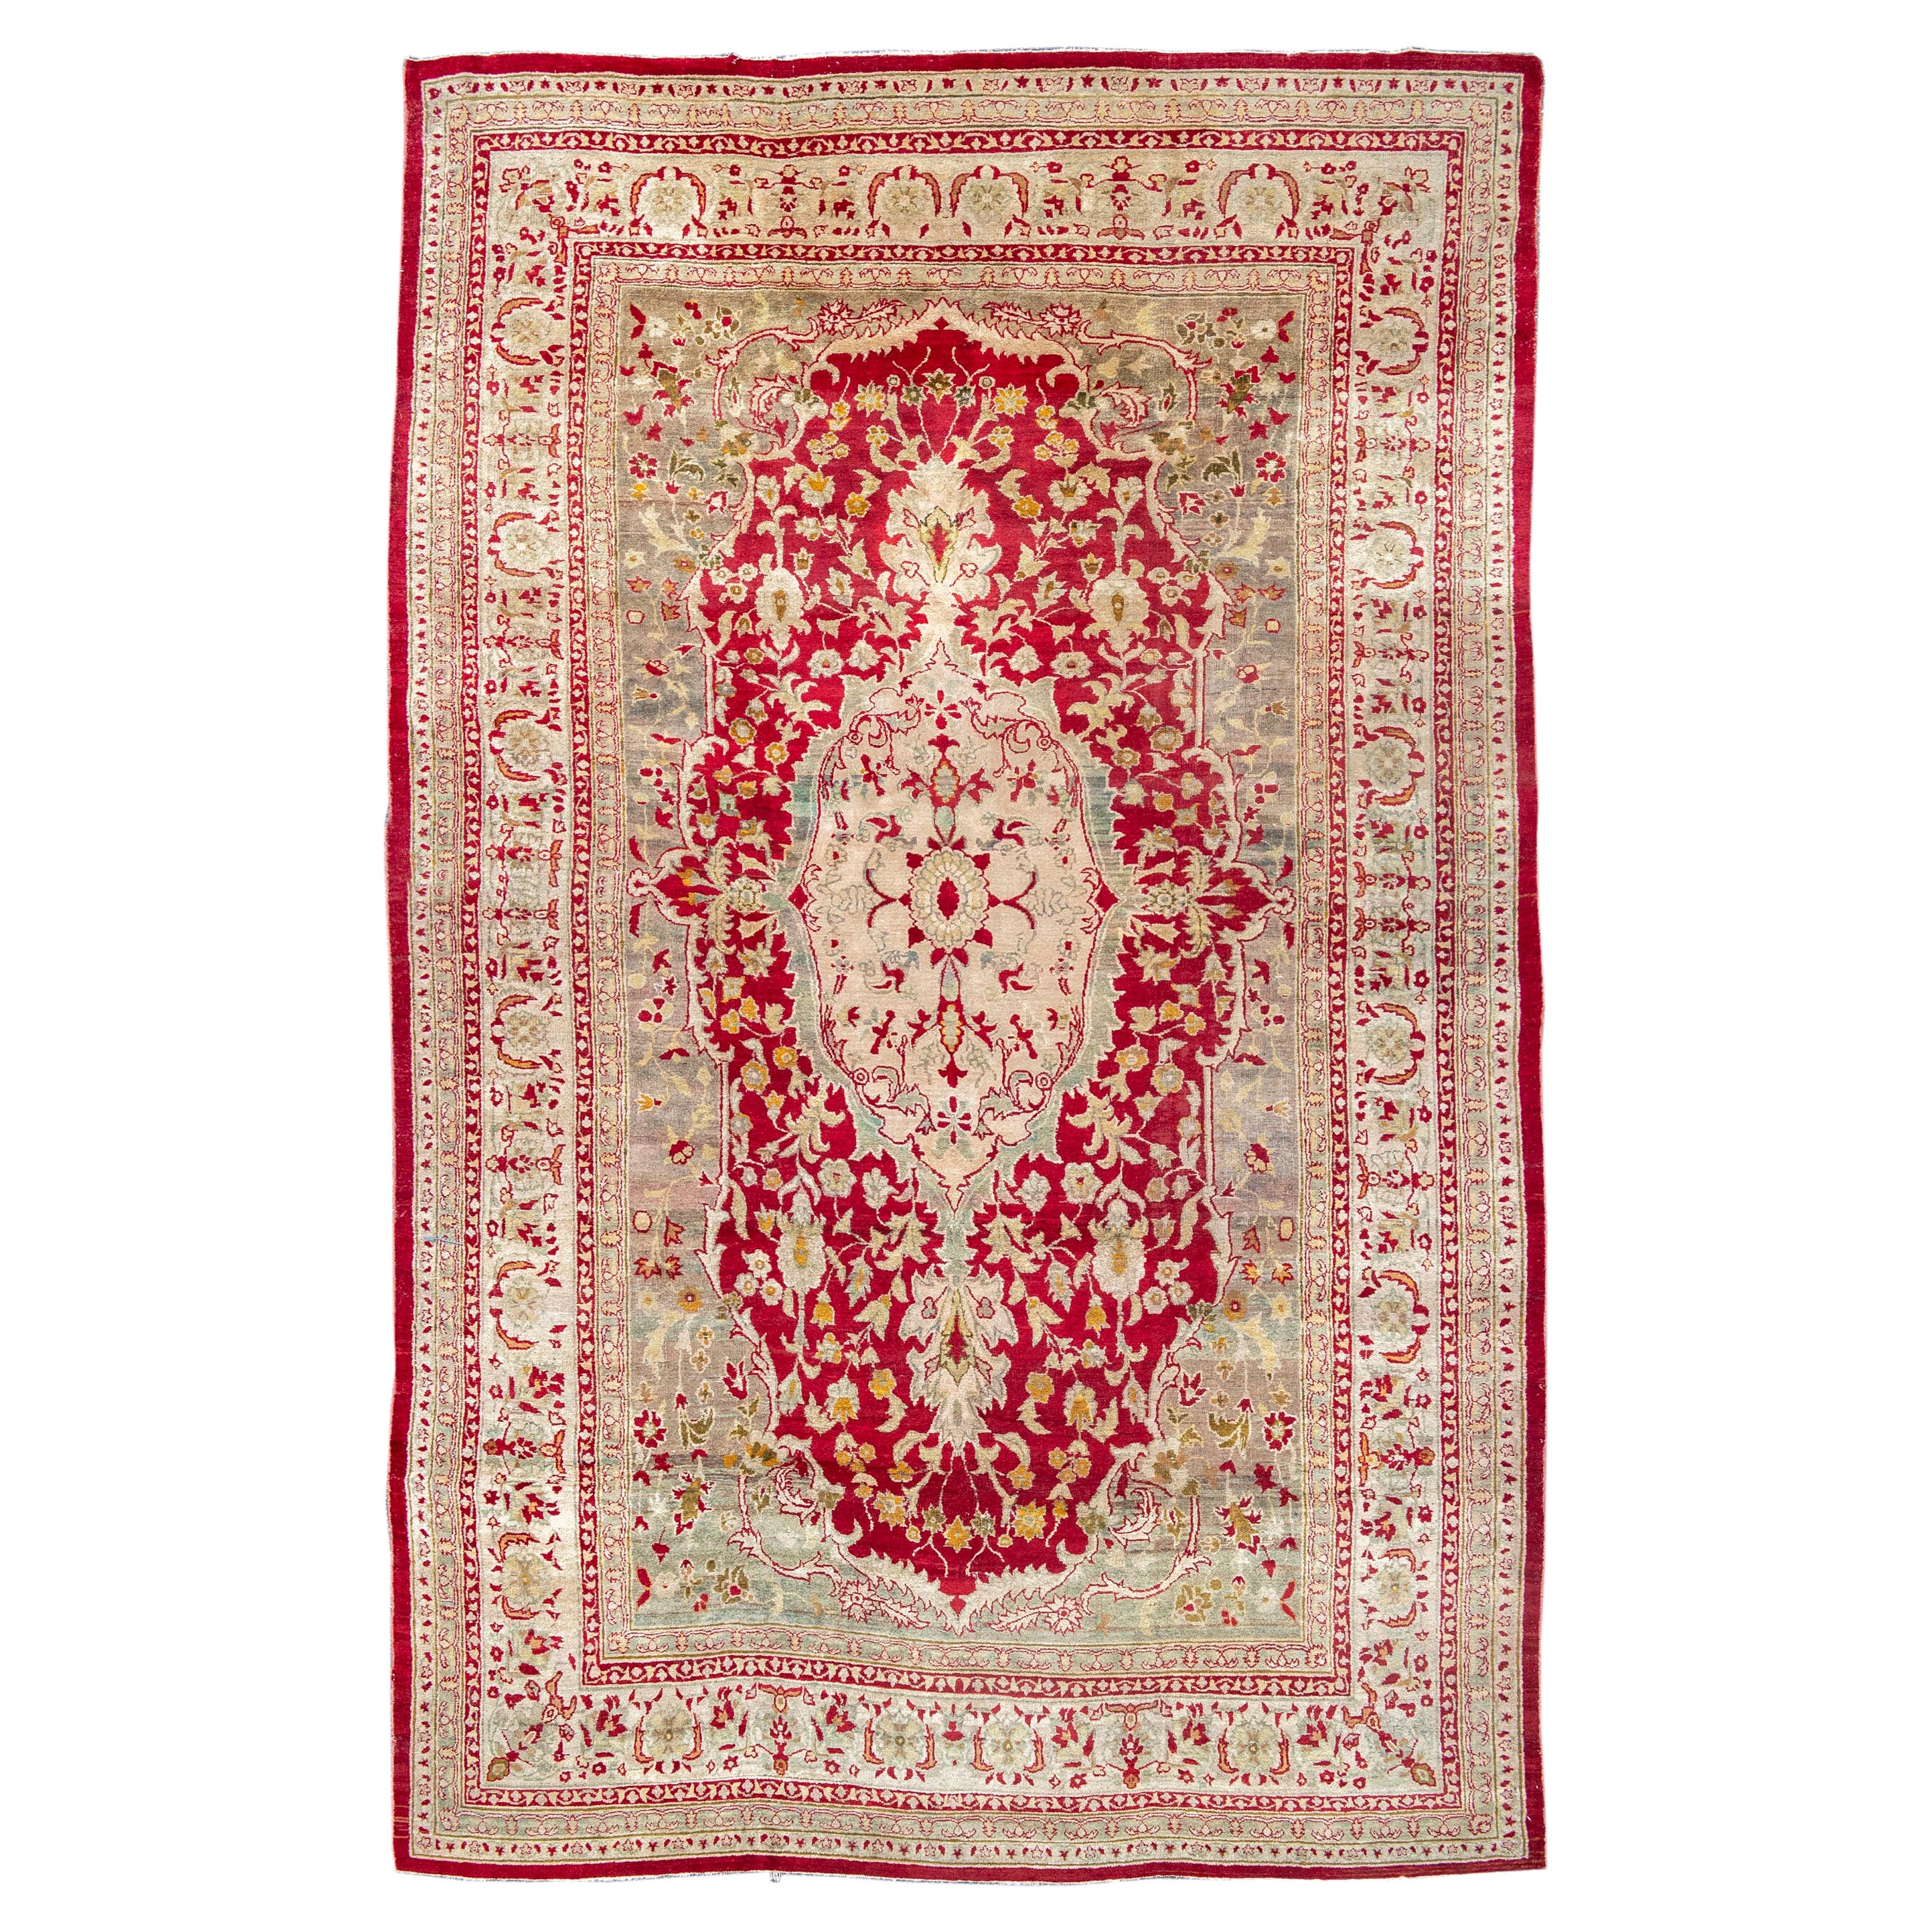 Antique Red and Gold Indian Agra Carpet, Late 19th Century For Sale